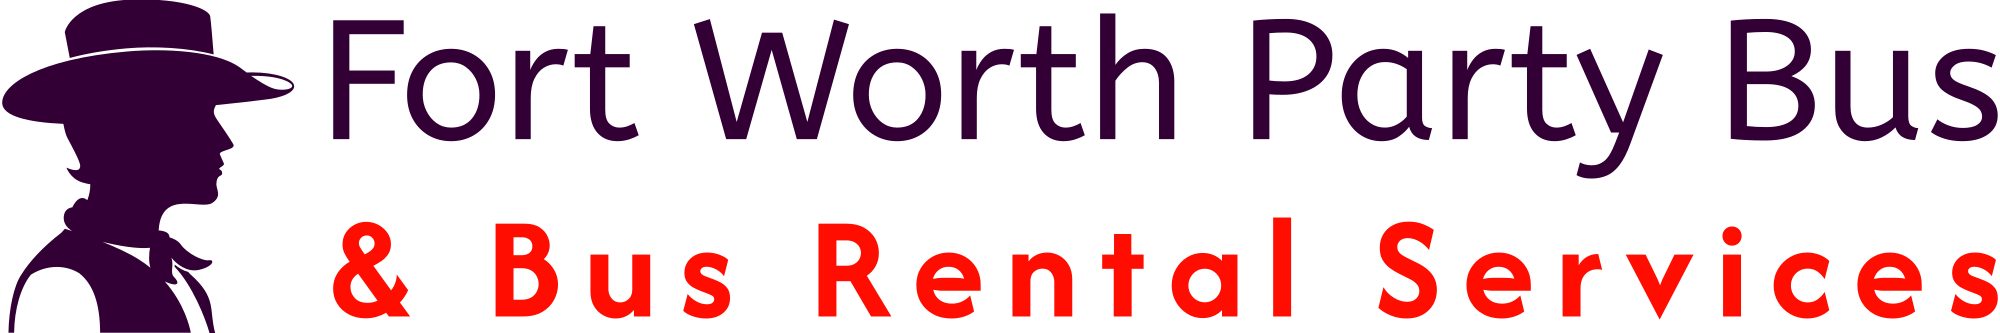 Fort Worth Party Bus Company logo